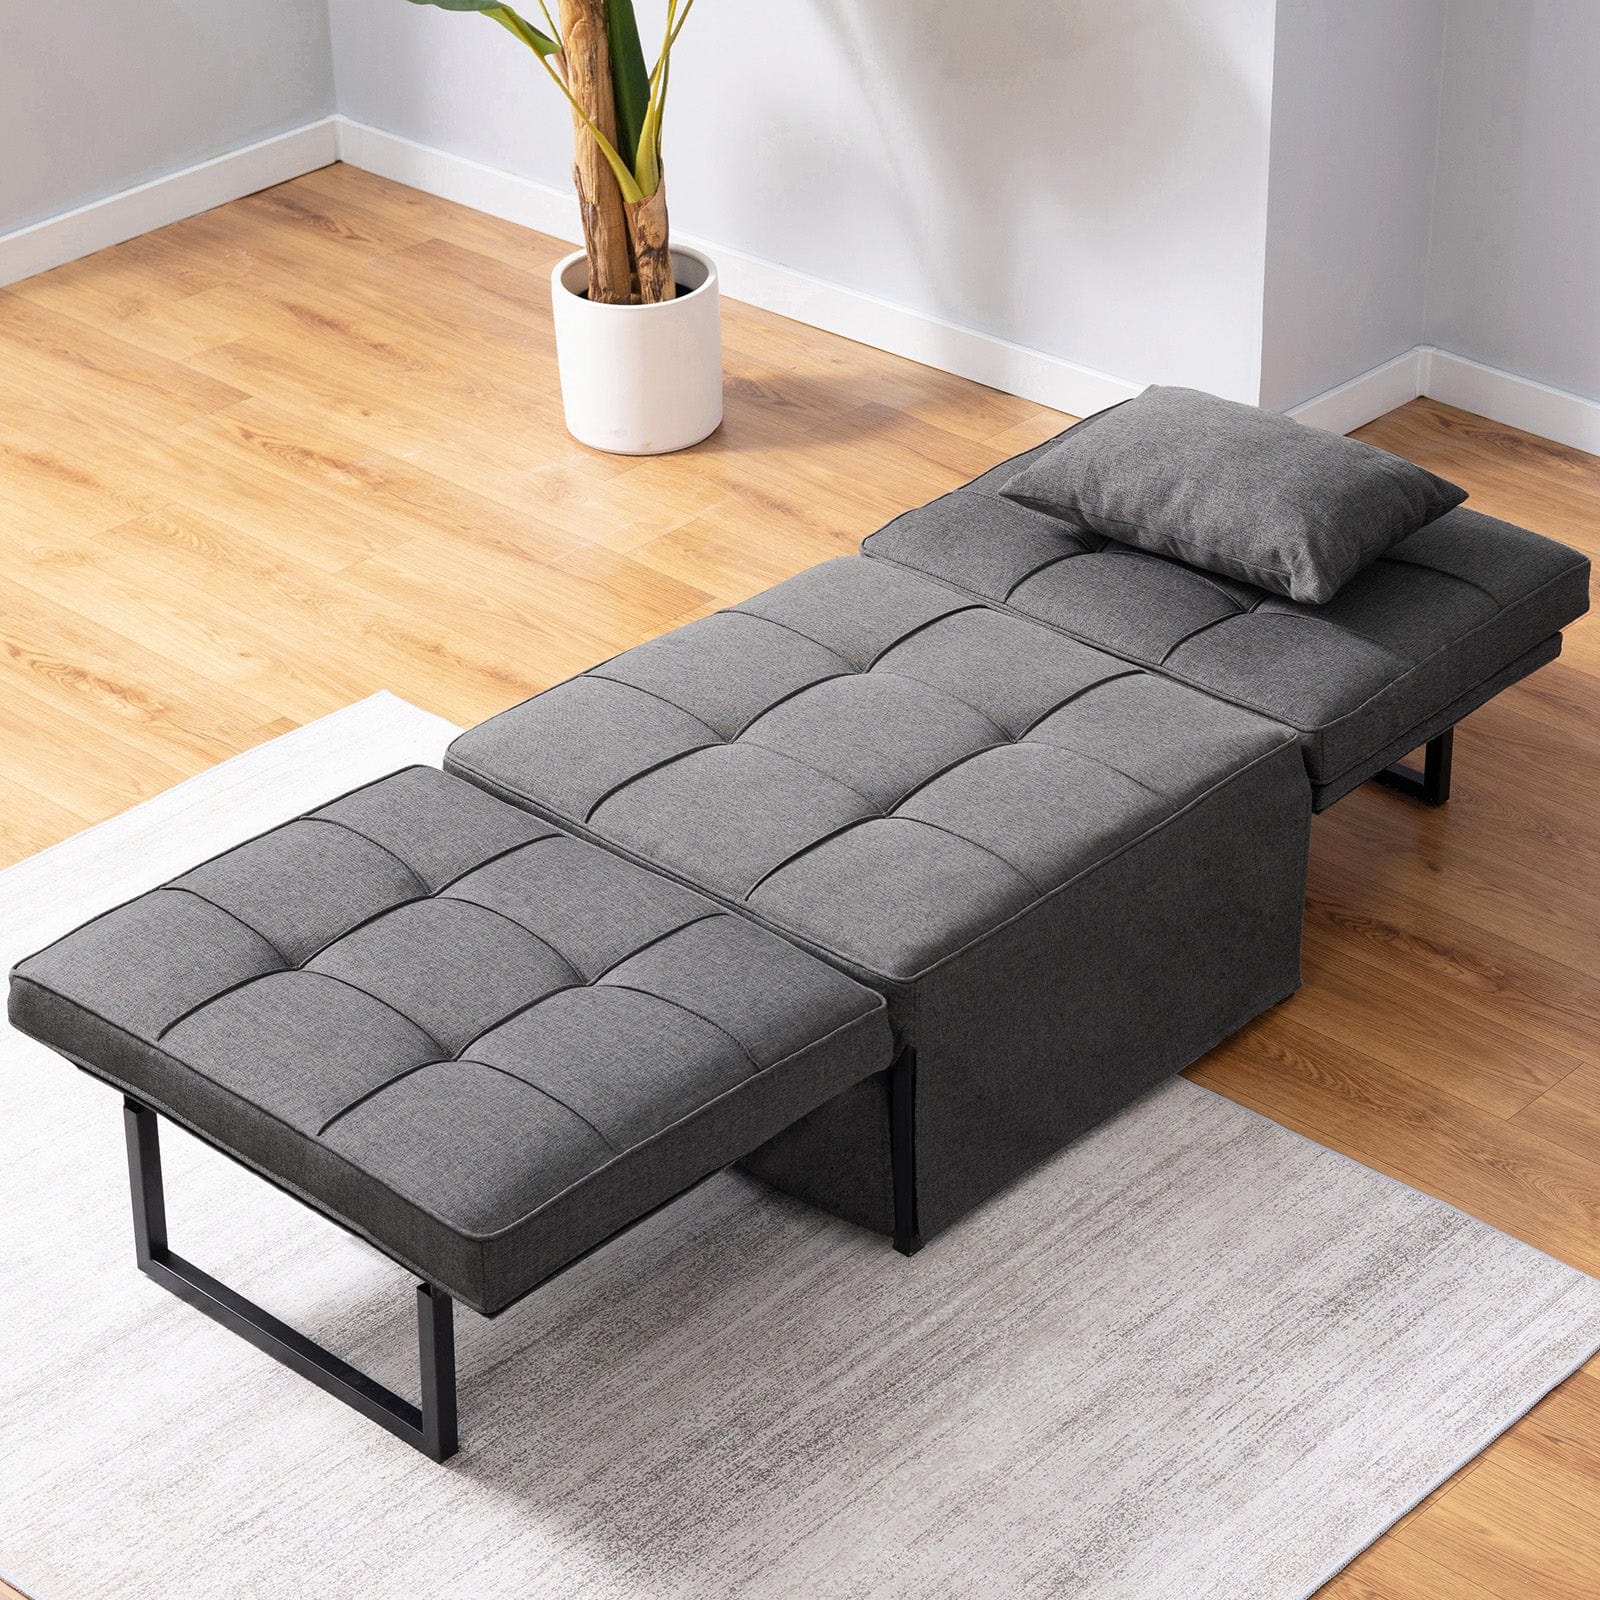 Sofa Bed | 4 In1 Pull Out Sleeper Chair With Multi-Functional Adjustable Recliner - uenjoysofa